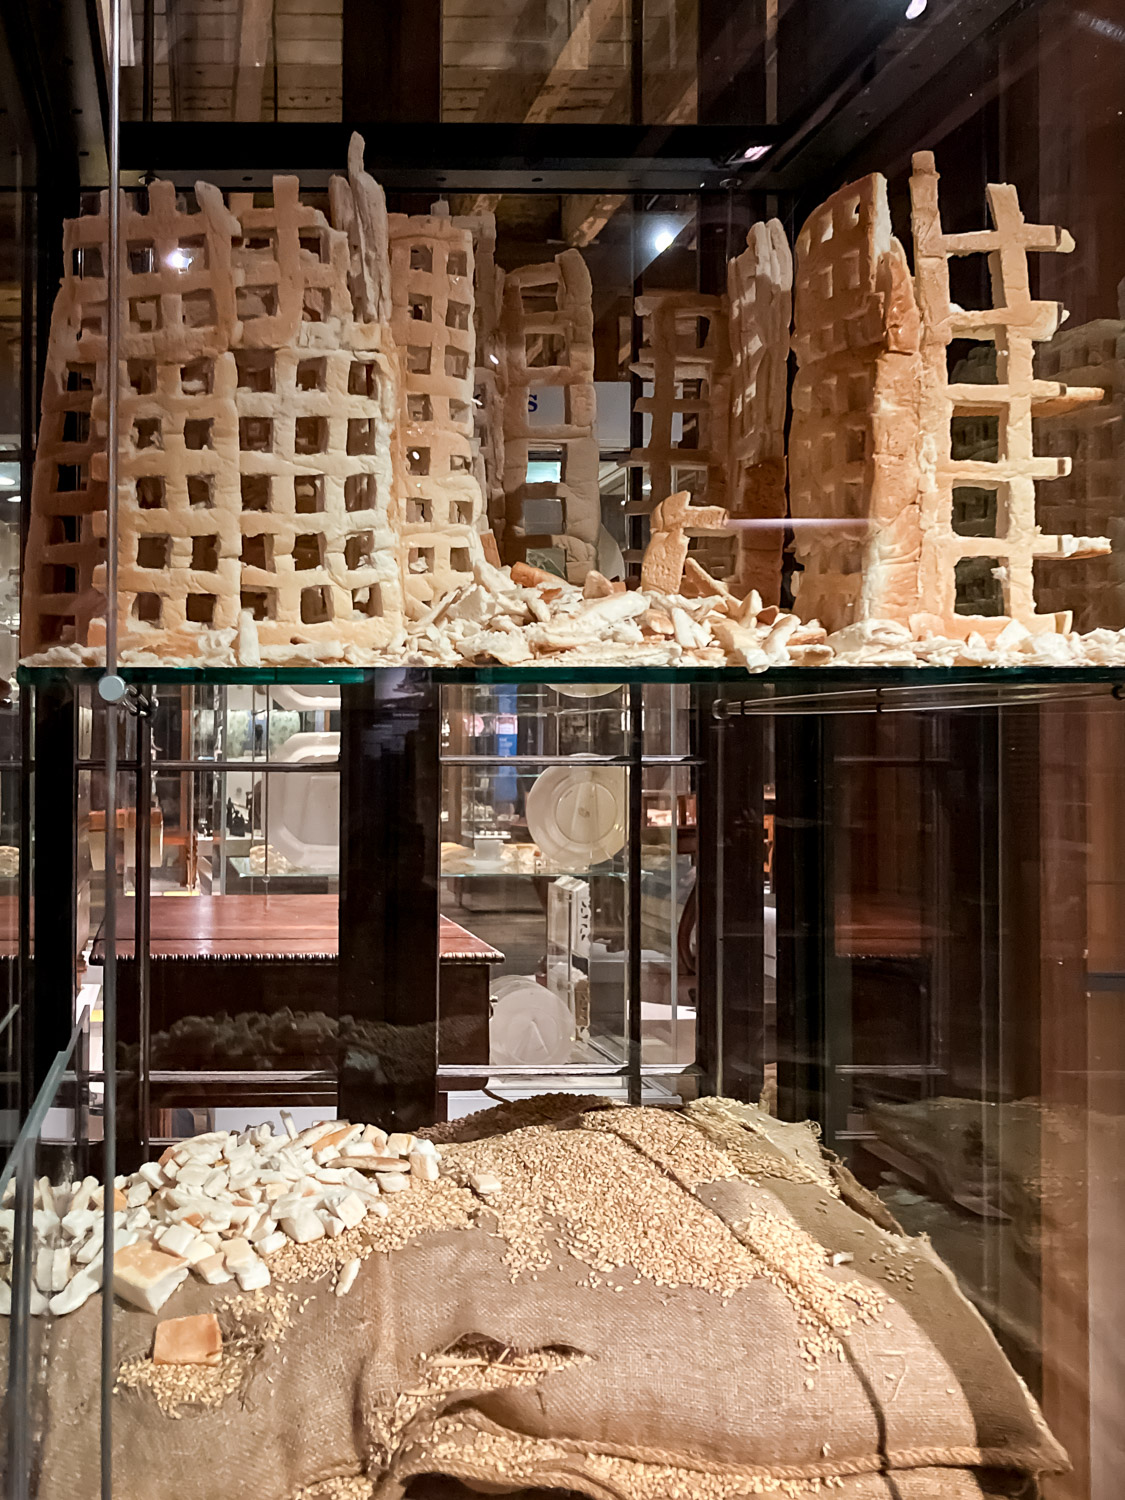 Half-destroyed buildings made from bread, atop a grain sack